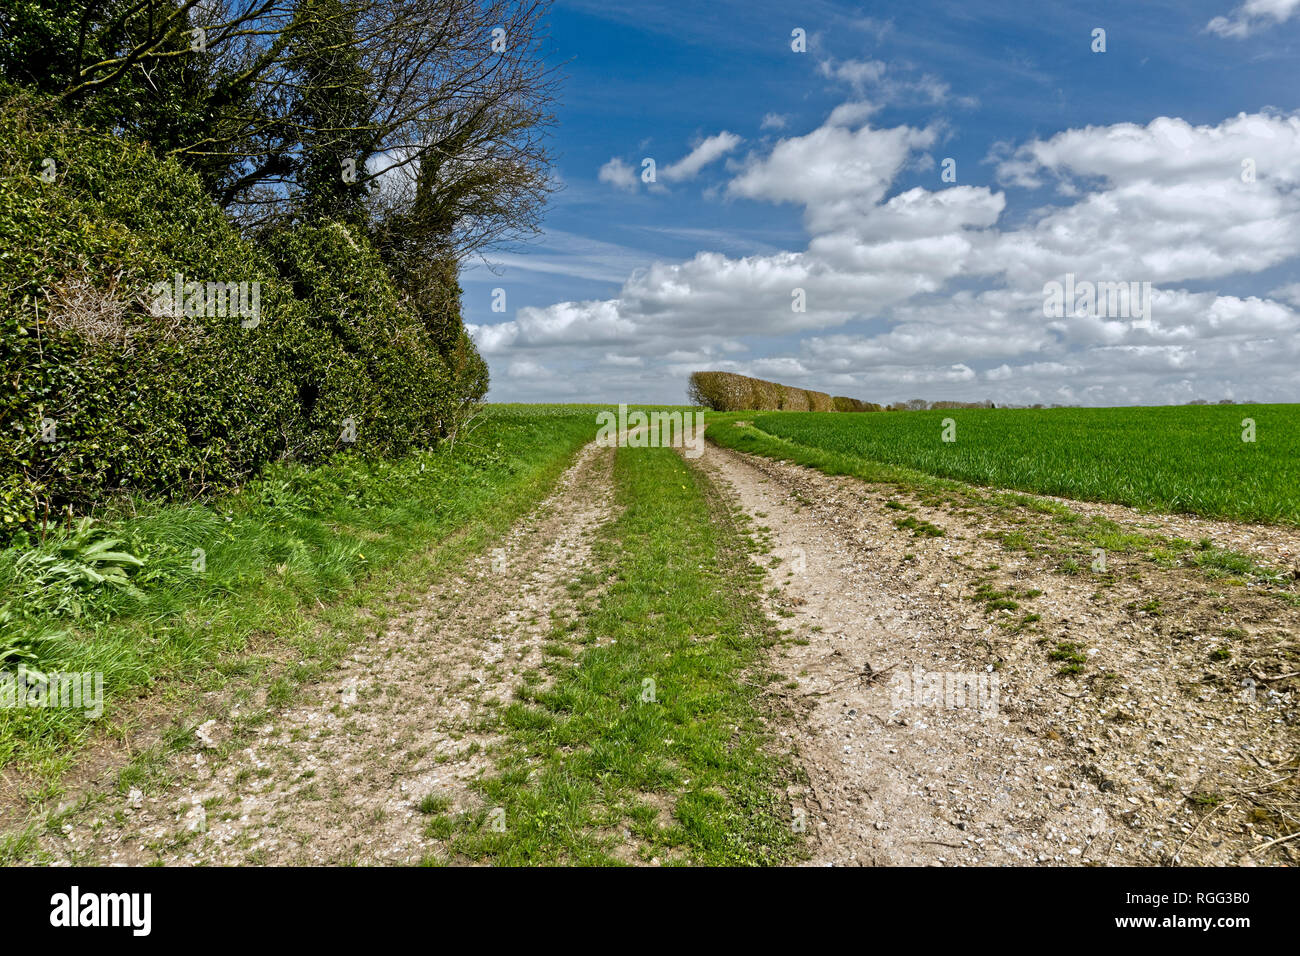 Salisbury Plain Wiltshire an area of chalk downland used for arable farming. Stock Photo